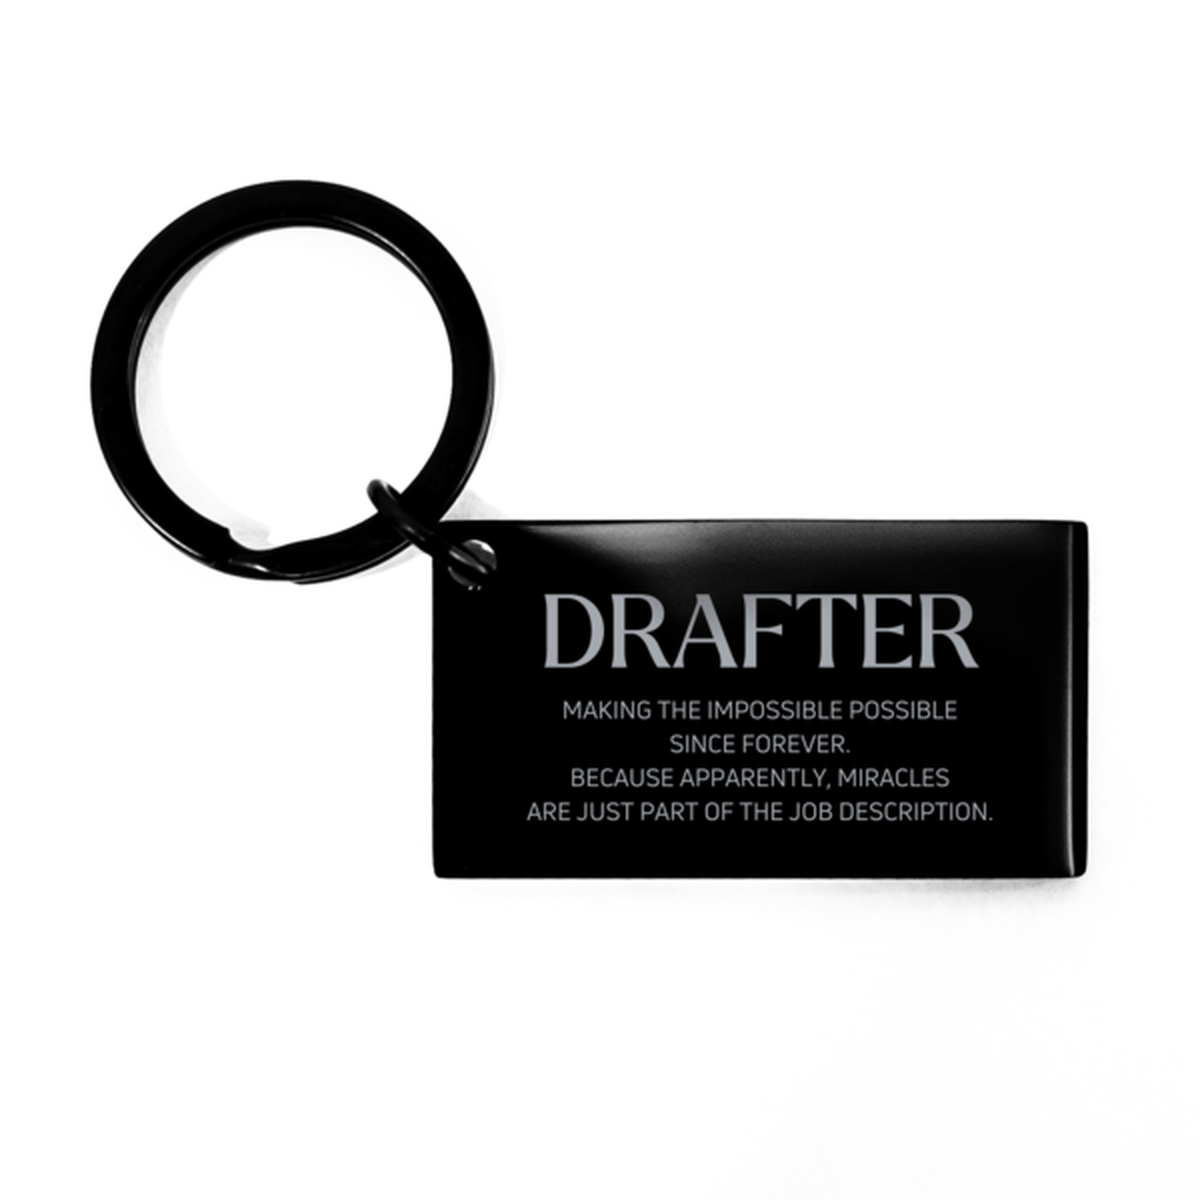 Funny Drafter Gifts, Miracles are just part of the job description, Inspirational Birthday Keychain For Drafter, Men, Women, Coworkers, Friends, Boss